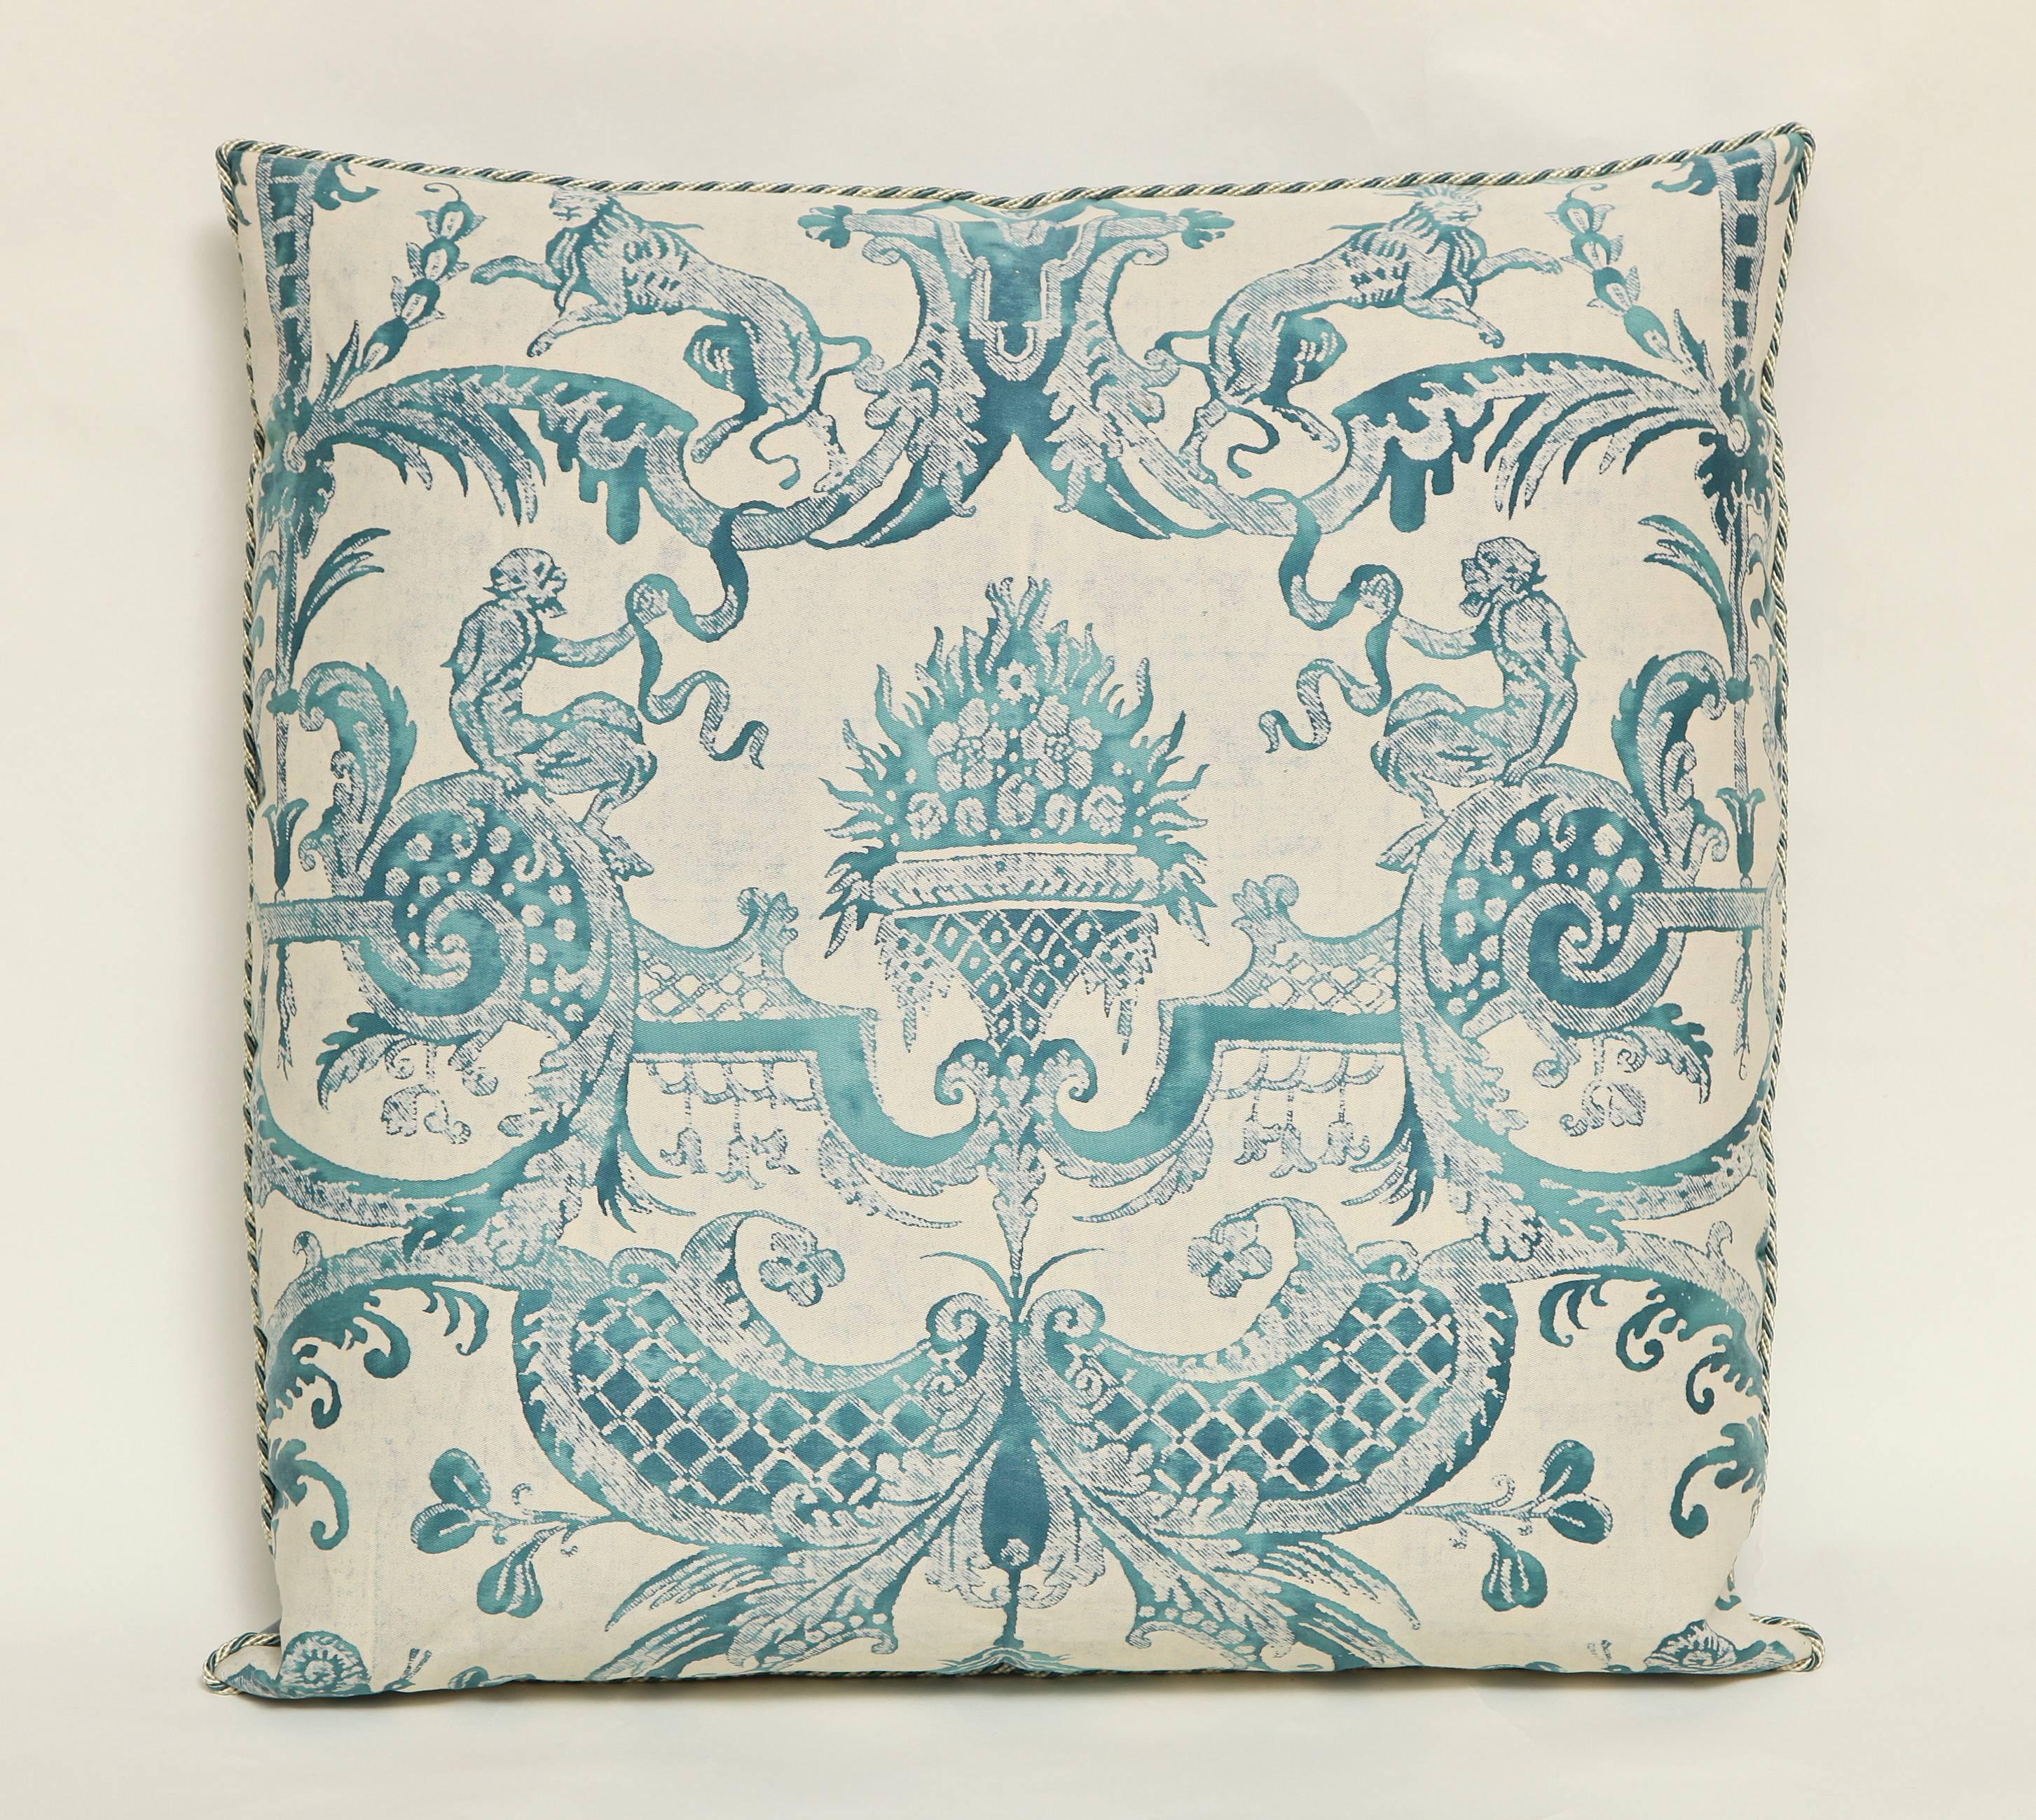 A pair of Fortuny fabric cushions in the Mazzarino print, peacock blue and ivory colorway with white and blue braided edging and grey or silver silk taffeta backing, the pattern, a 17th century French design named after Cardinal Mazarin at the Court